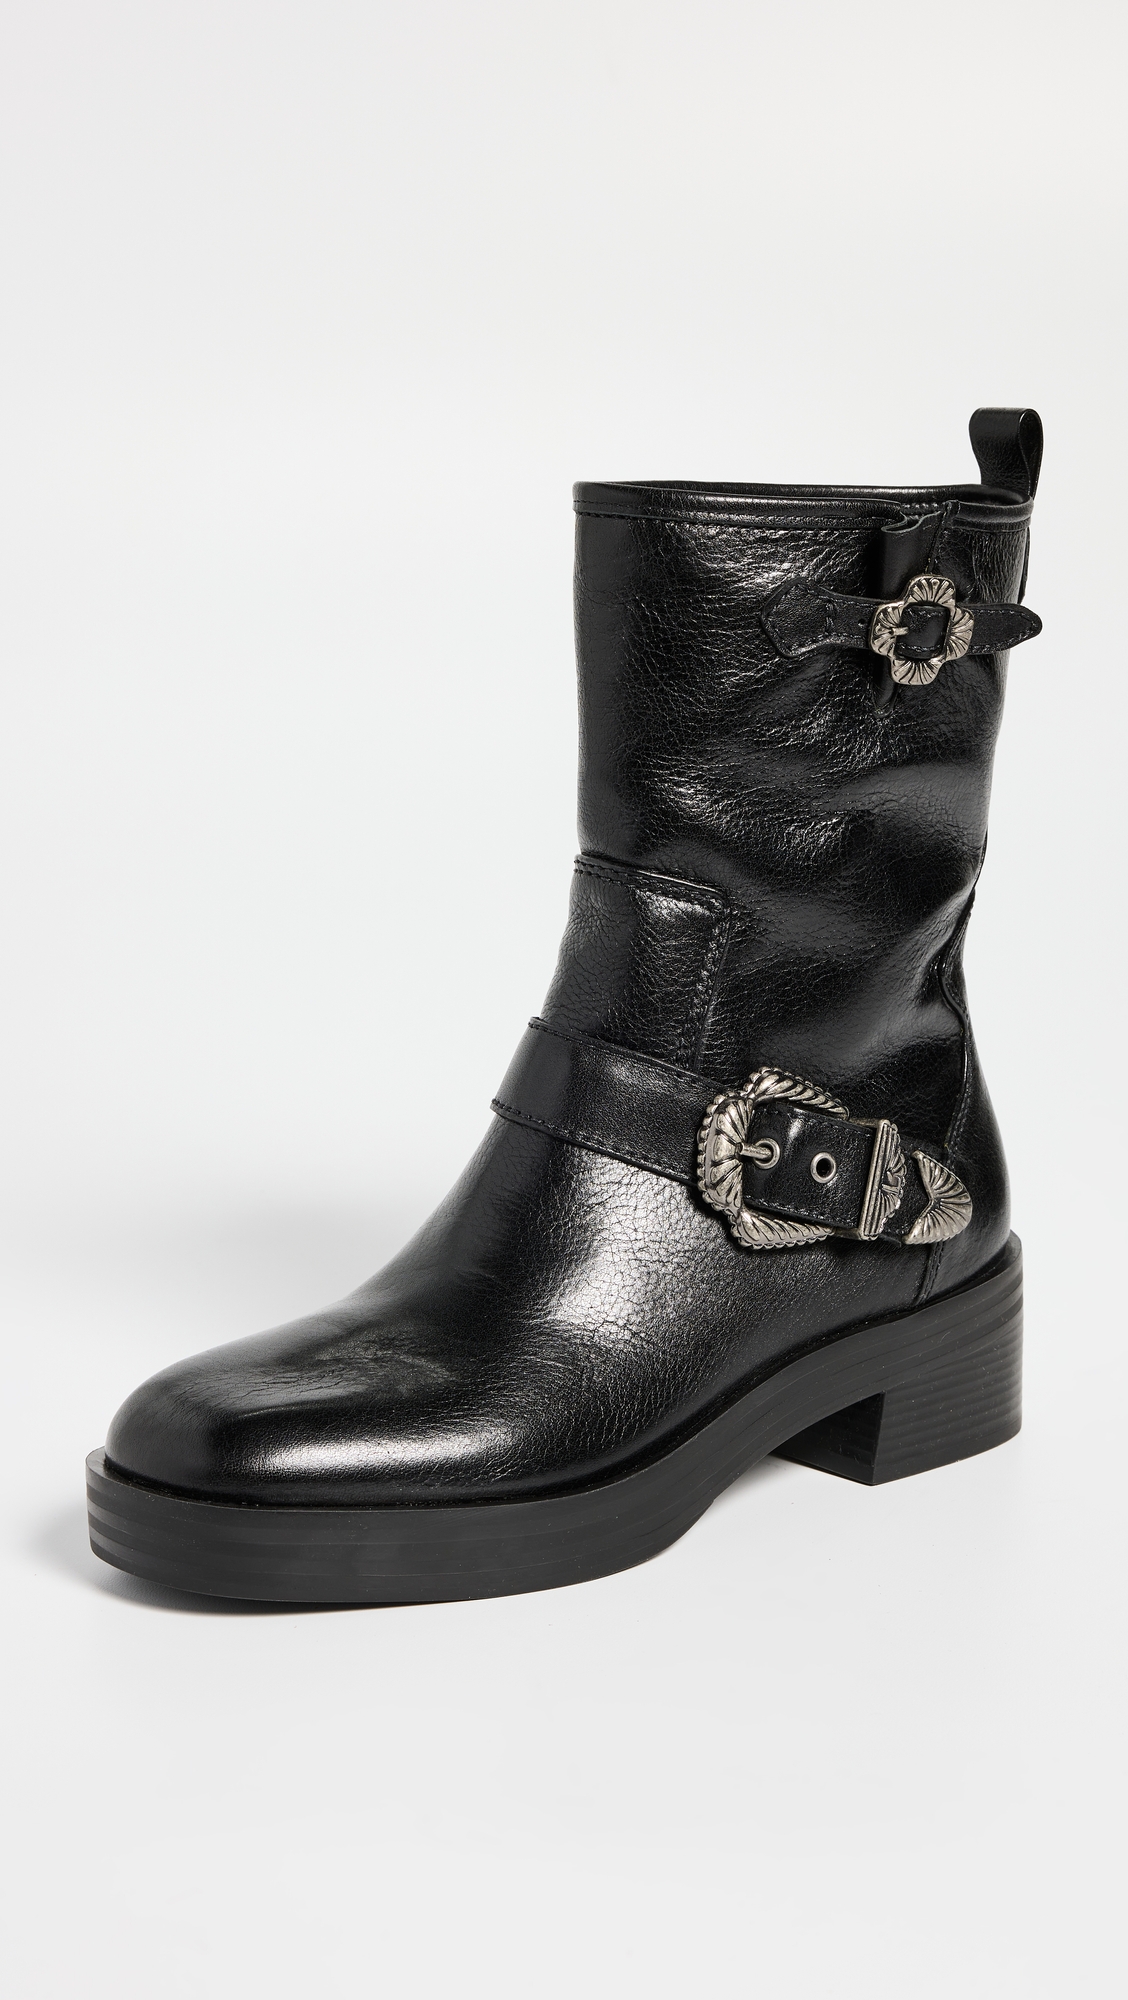 black biker boots for women with buckle details